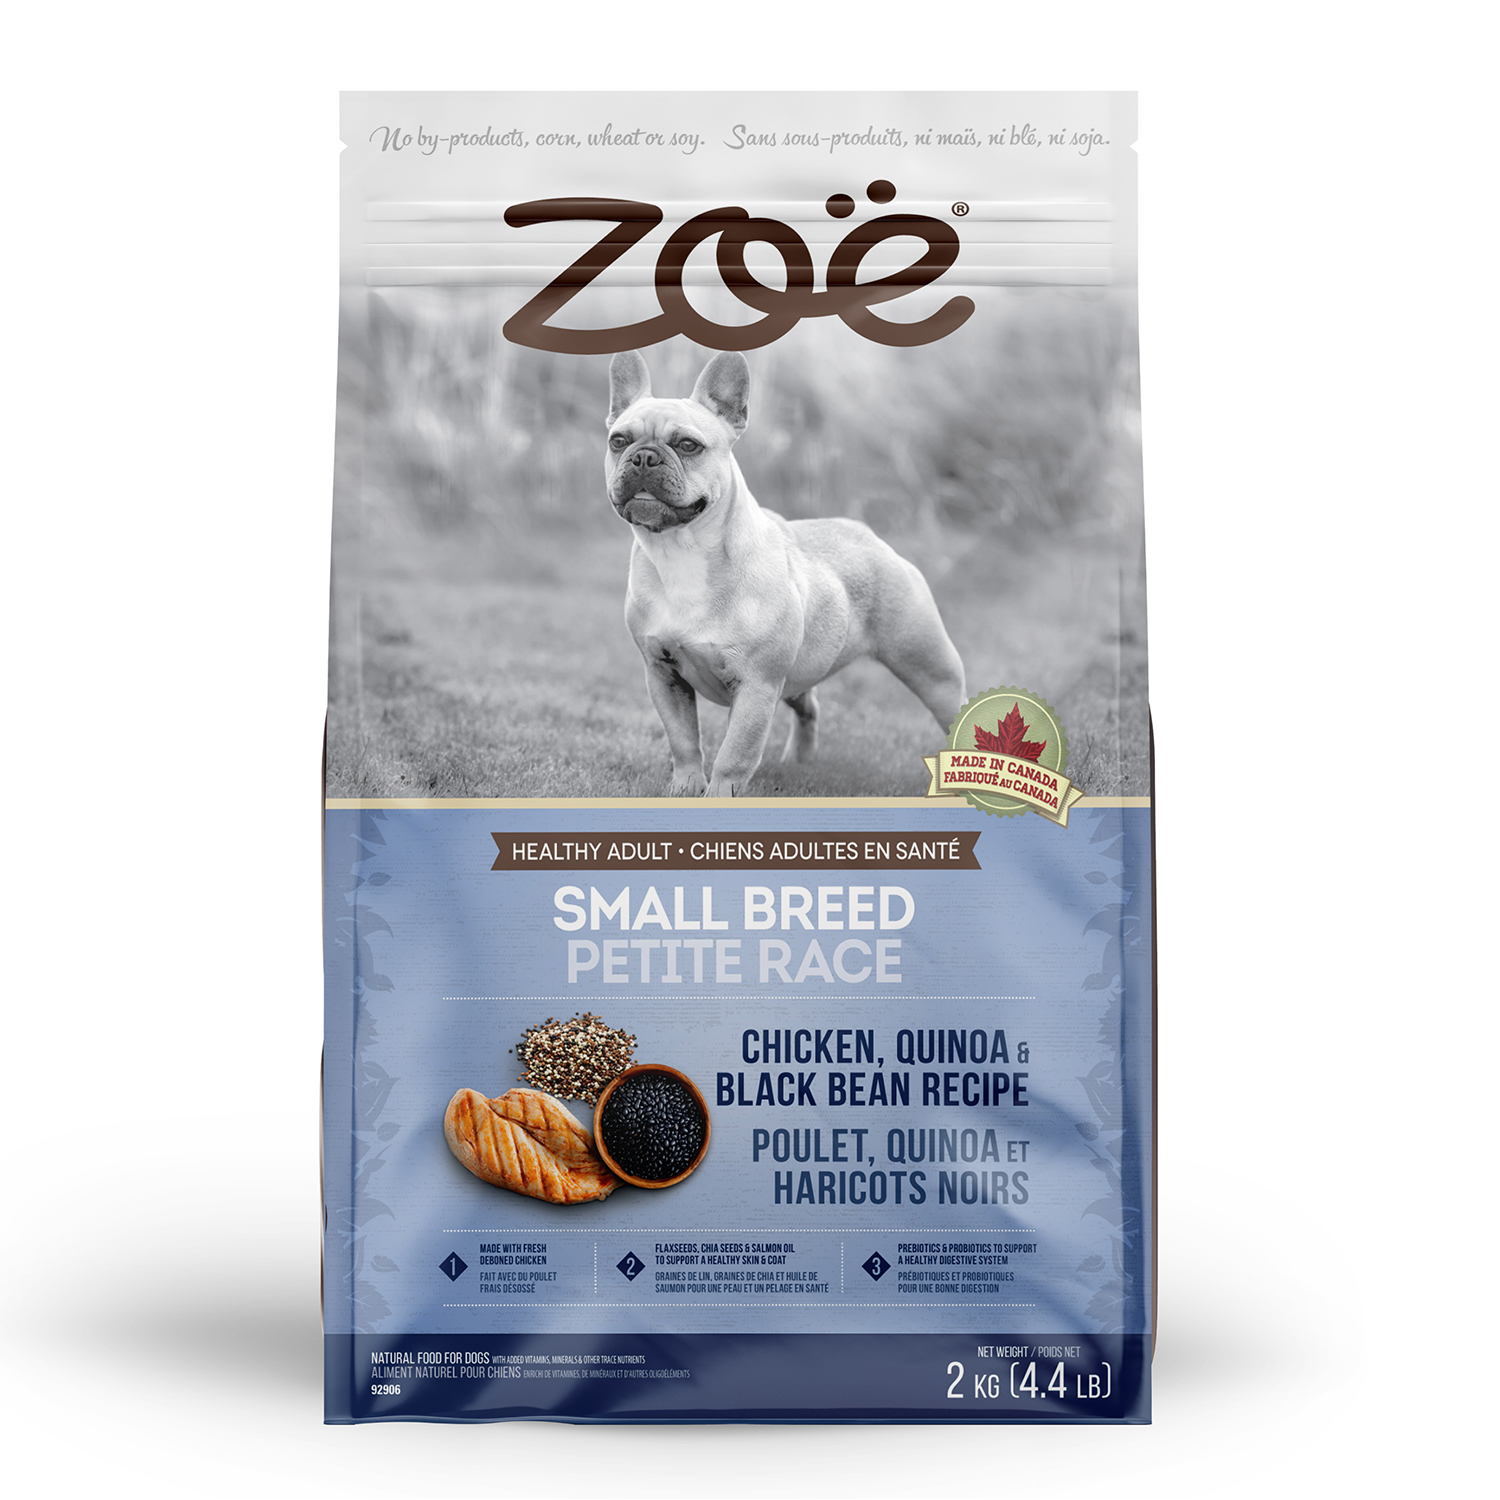 Small Pet Nutrition - Information and Advice